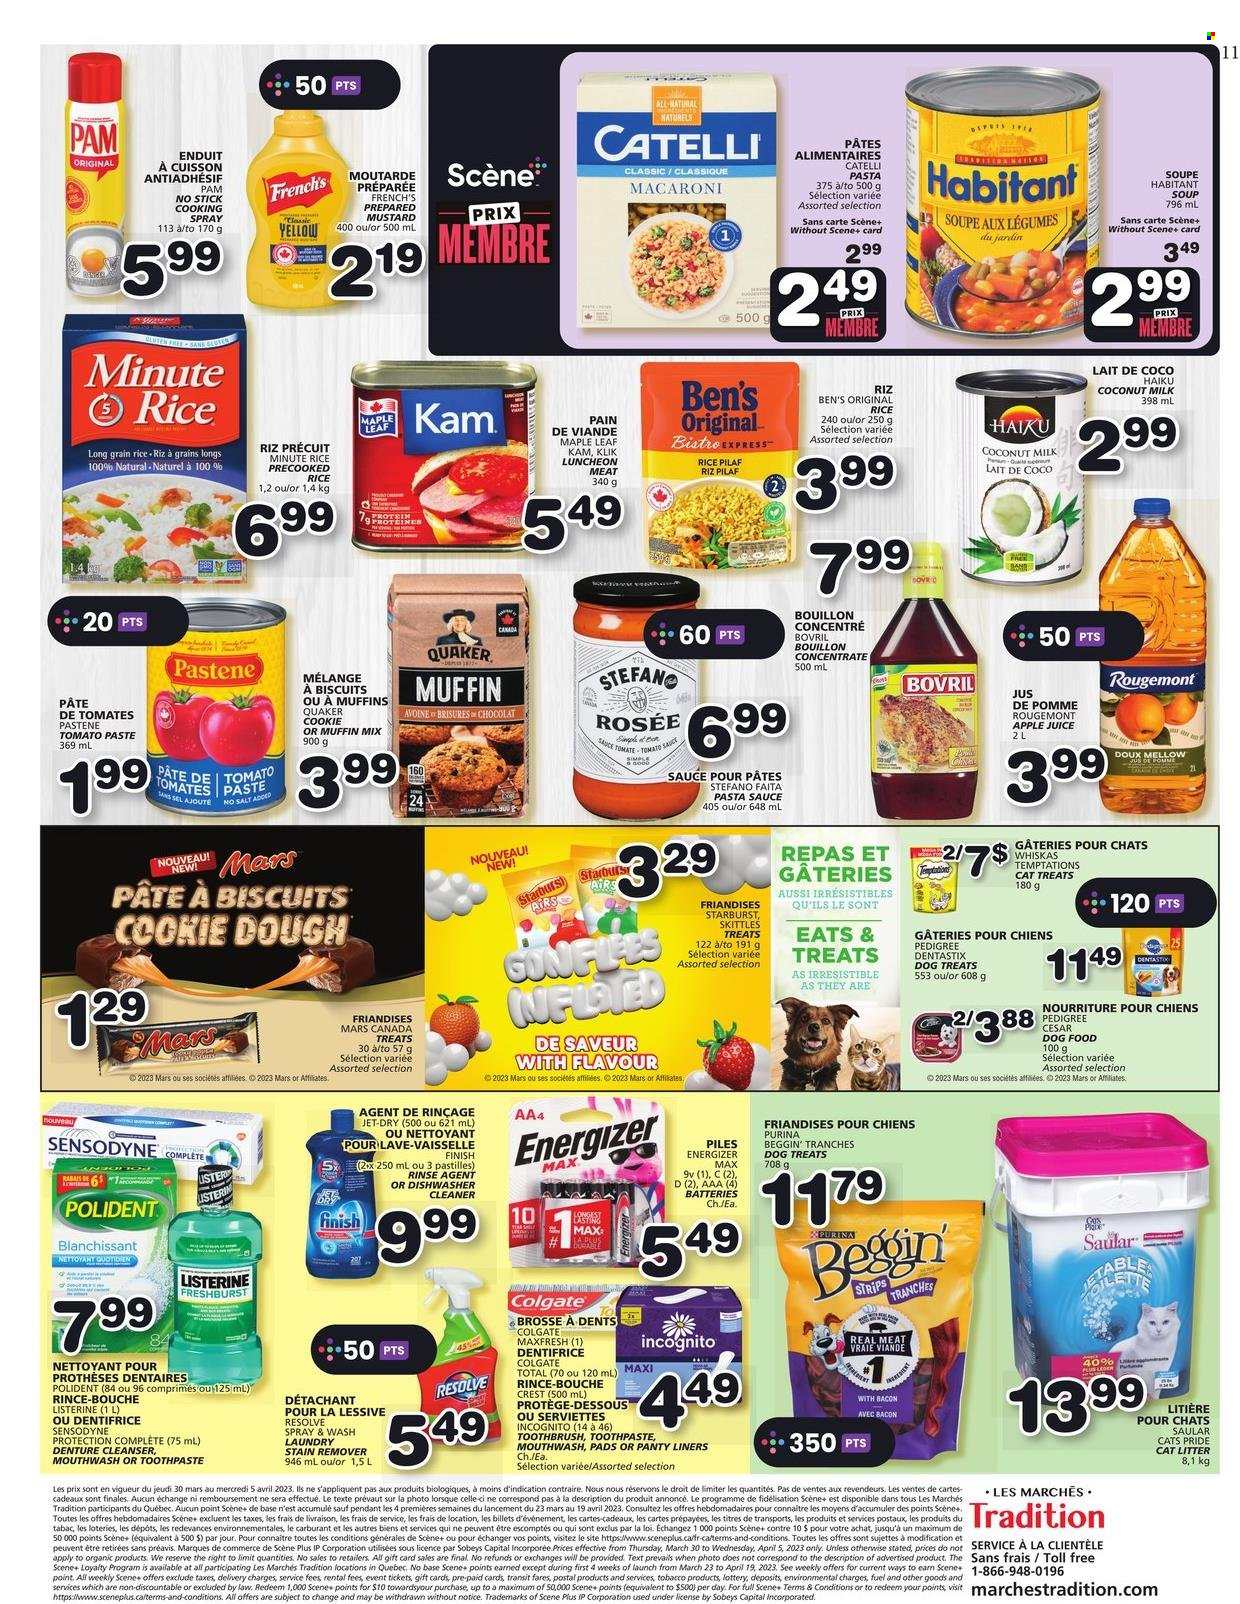 thumbnail - Les Marchés Tradition Flyer - March 30, 2023 - April 05, 2023 - Sales products - muffin mix, pasta sauce, macaroni, soup, Quaker, strips, cookie dough, Dove, Mars, biscuit, pastilles, Skittles, Starburst, bouillon, coconut milk, tomato paste, rice, long grain rice, mustard, cooking spray, apple juice, juice, cleaner, stain remover, dishwashing liquid, dishwasher cleaner, Jet, toothbrush, toothpaste, mouthwash, Polident, Crest, cleanser, animal food, dog food, Purina, Dentastix, Pedigree, Beggin', Energizer, Colgate, Listerine, Sensodyne, Whiskas. Page 9.